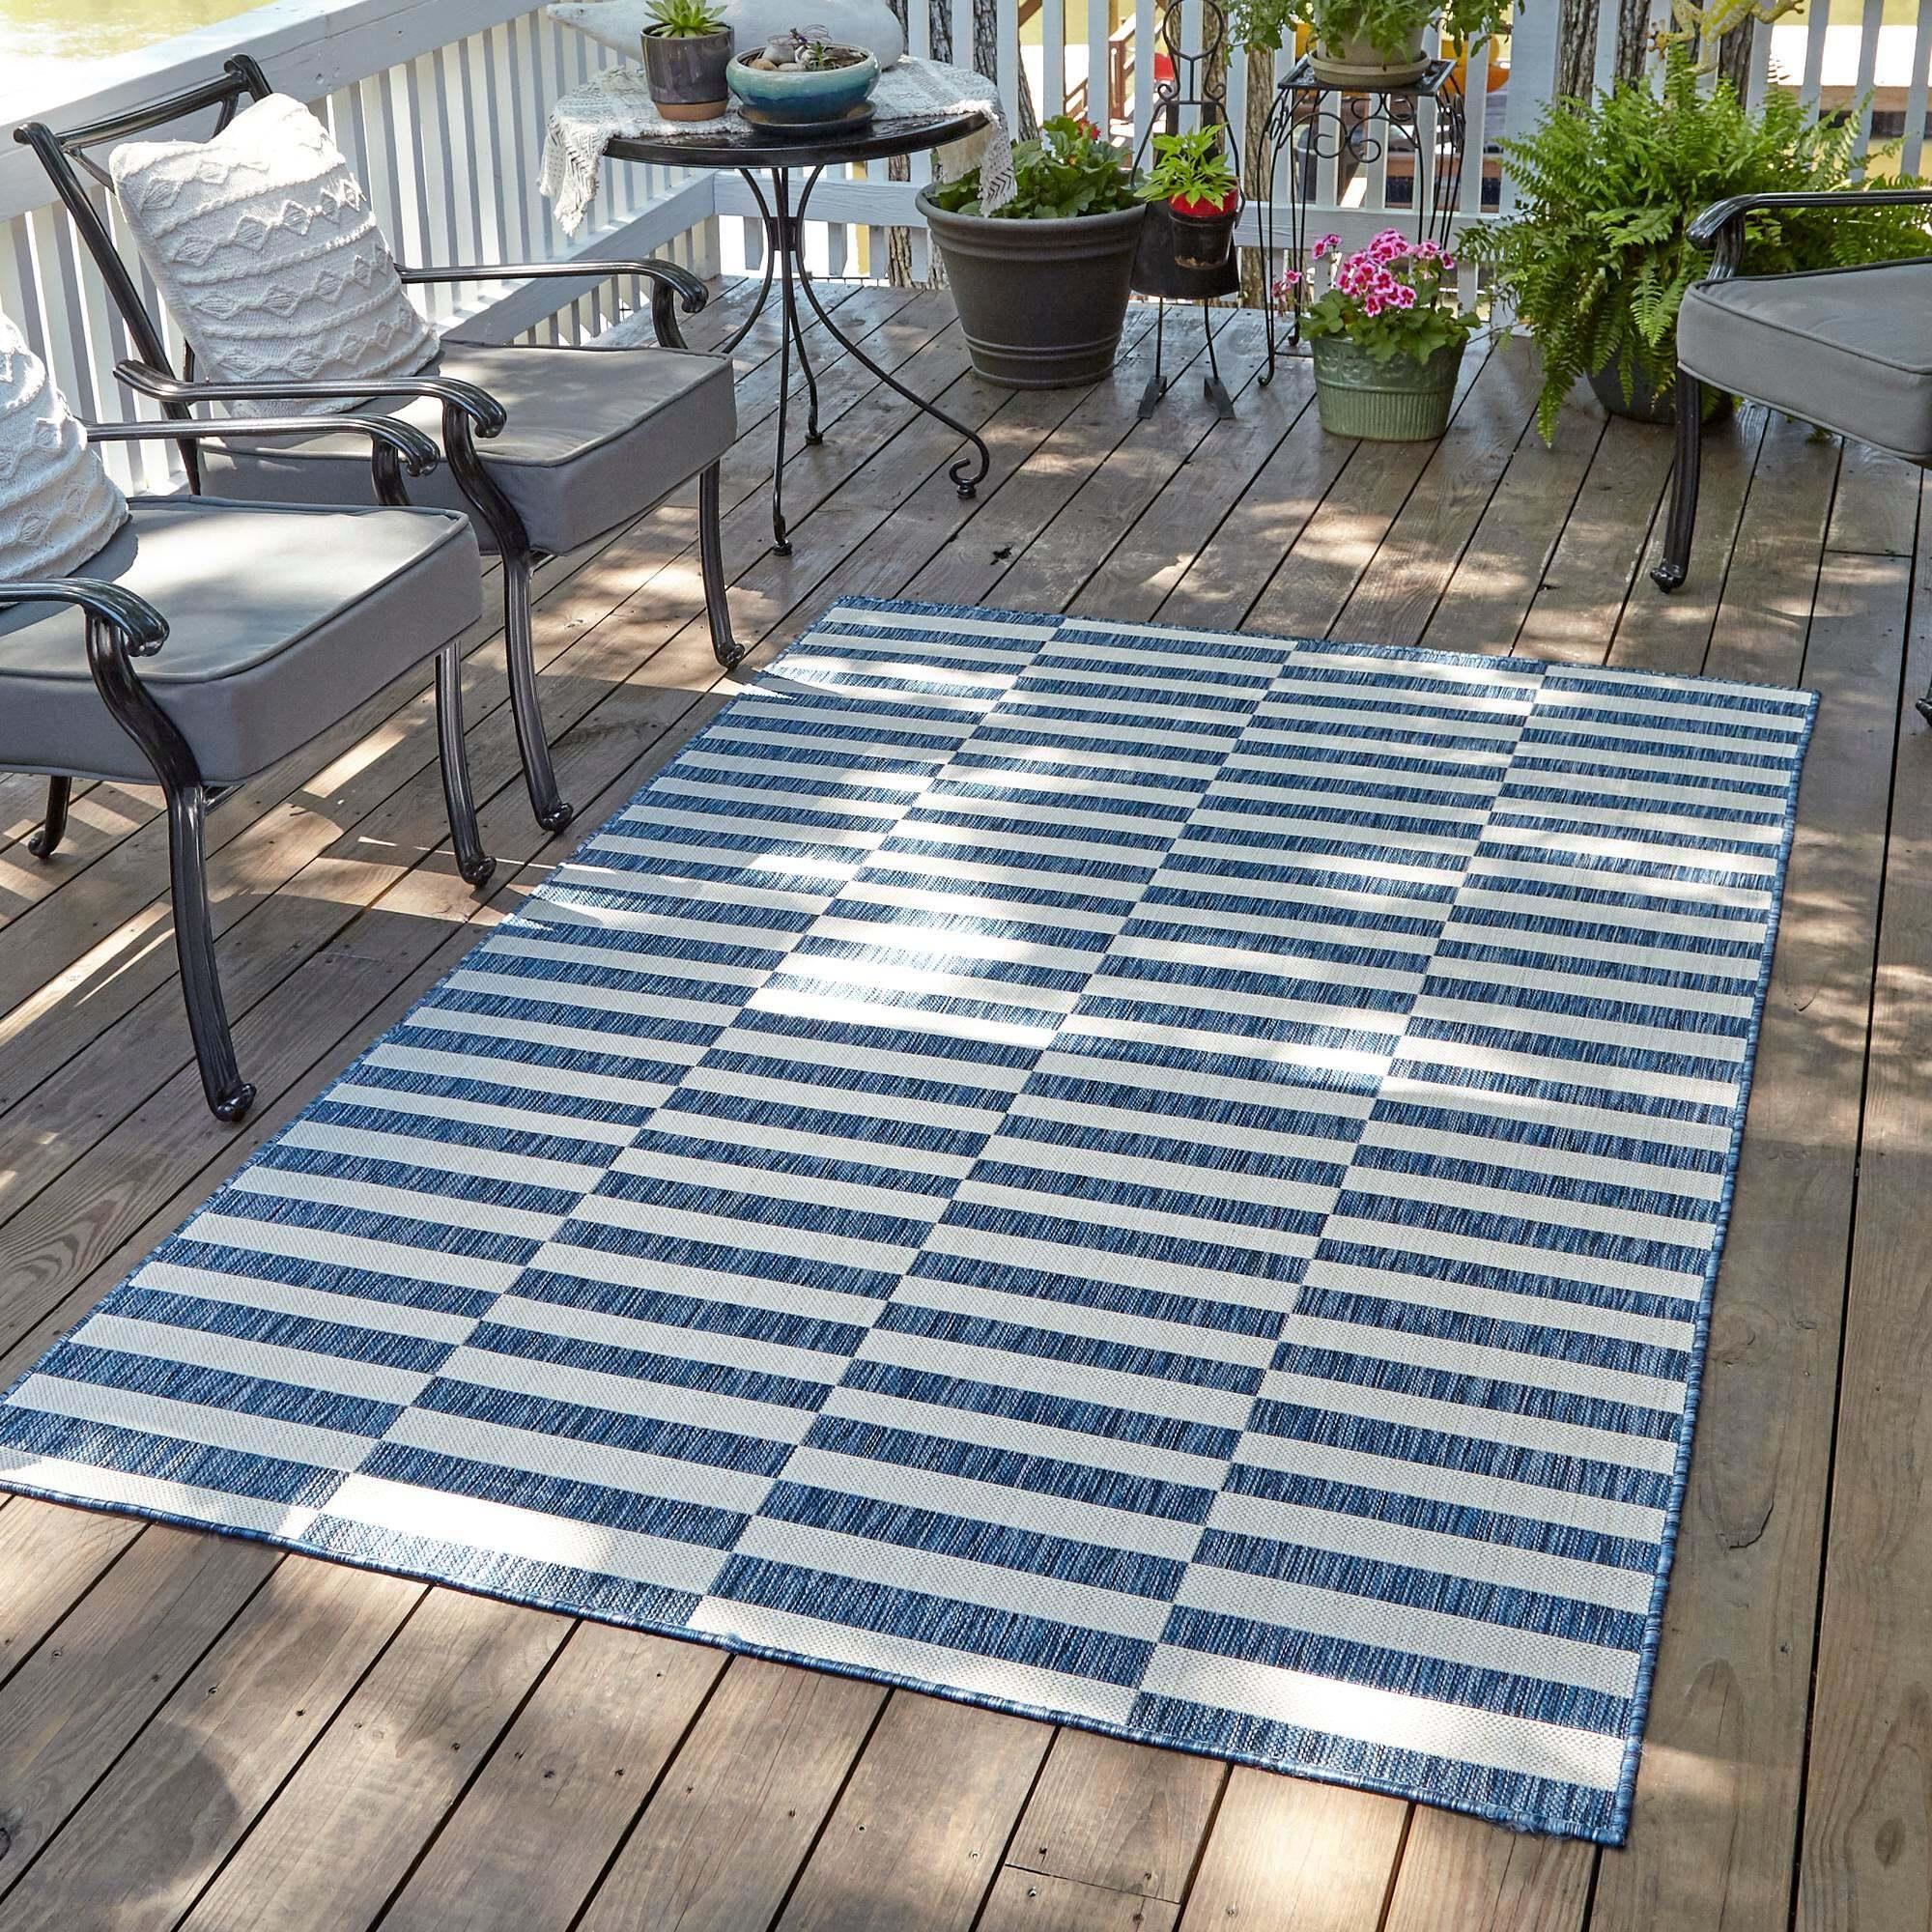 Unique Loom Outdoor Rugs - Outdoor Striped Geometric Rectangular 8x11 Rug Navy Blue & Ivory